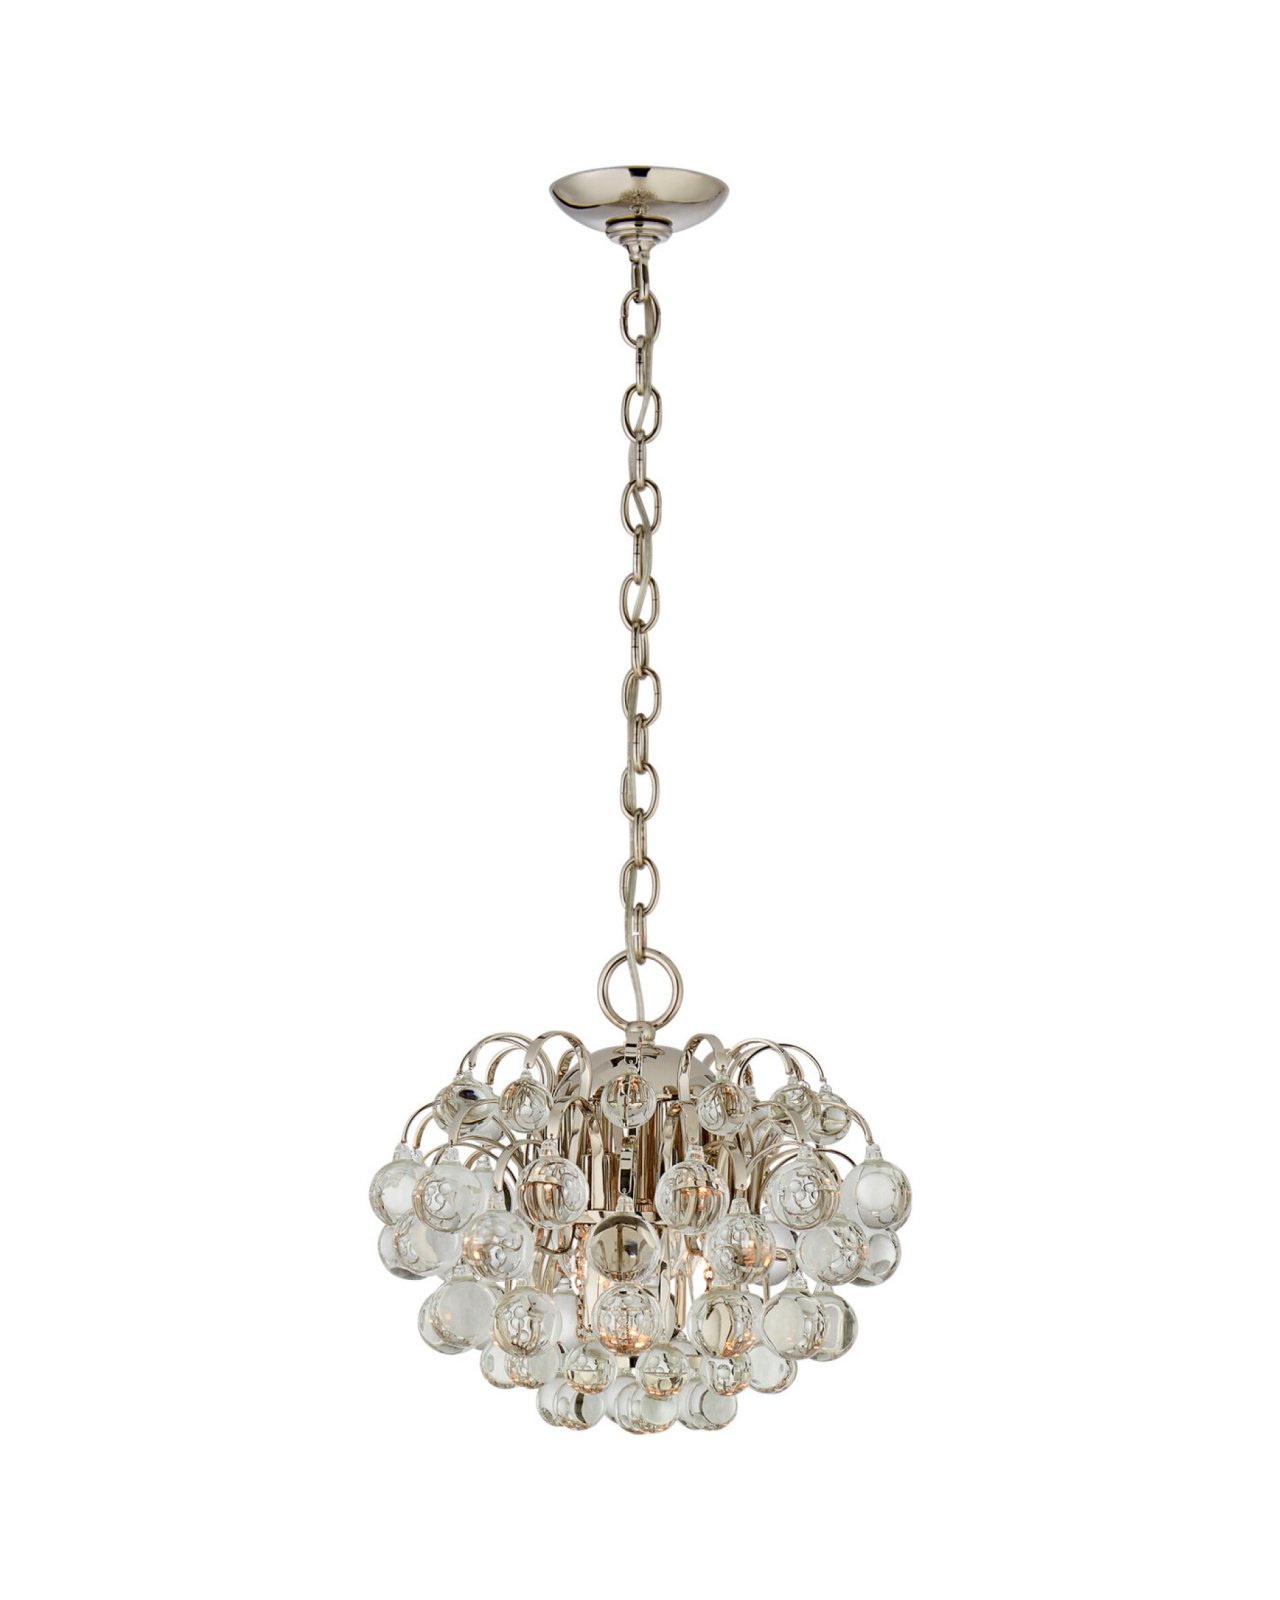 Bellvale Small Chandelier Polished Nickel